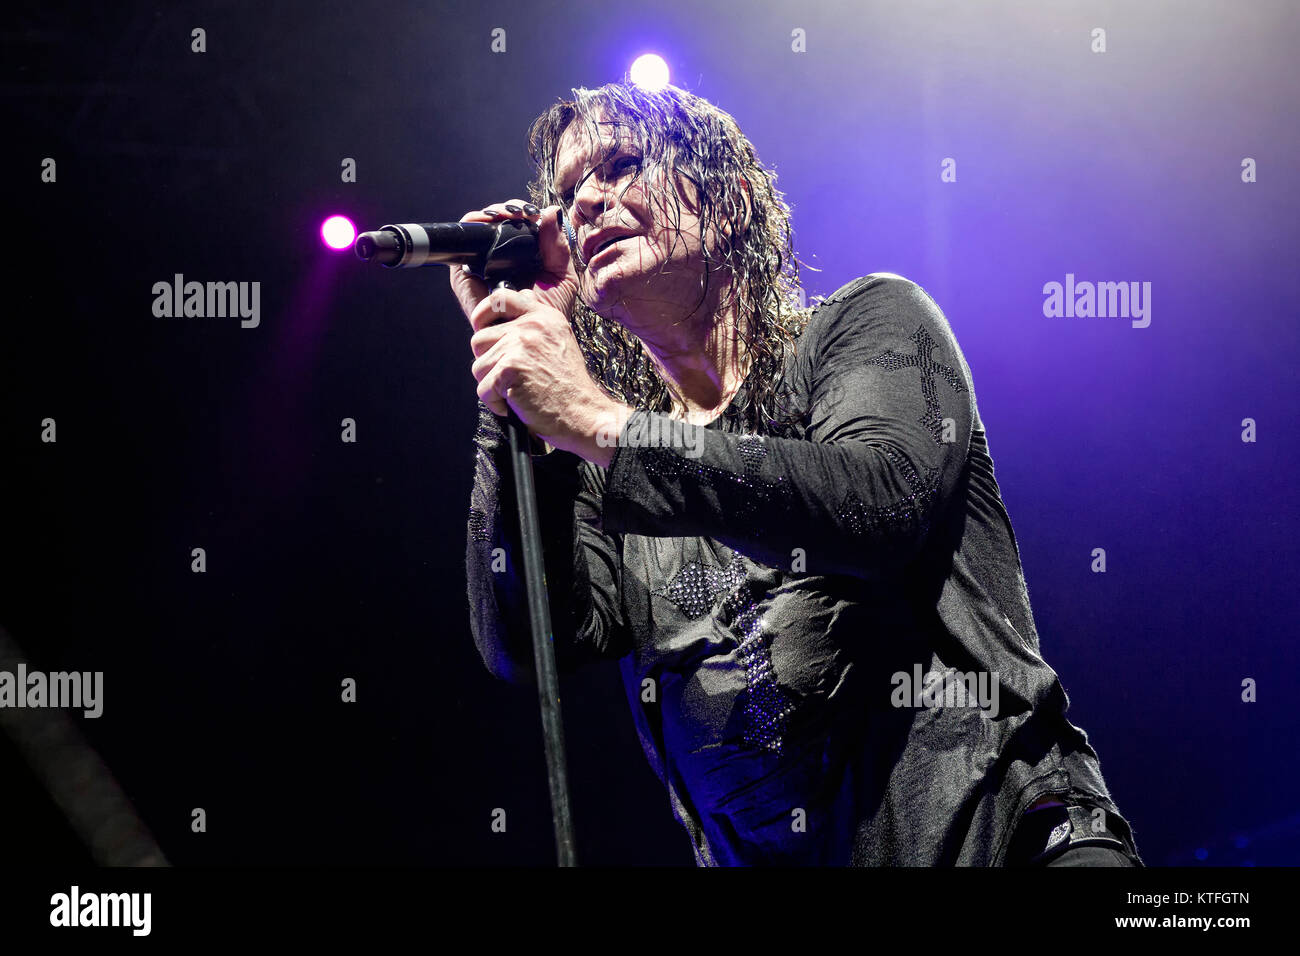 The English vocalist, songwriter and television personality Ozzy Osbourne performs a live concert at Oslo Spektrum as part of the “Ozzy and Friends tour” in 2012. Ozzy Osbourne is best known as the vocalist of the English rock band Black Sabbath. Norway, 31/05 2012. Stock Photo